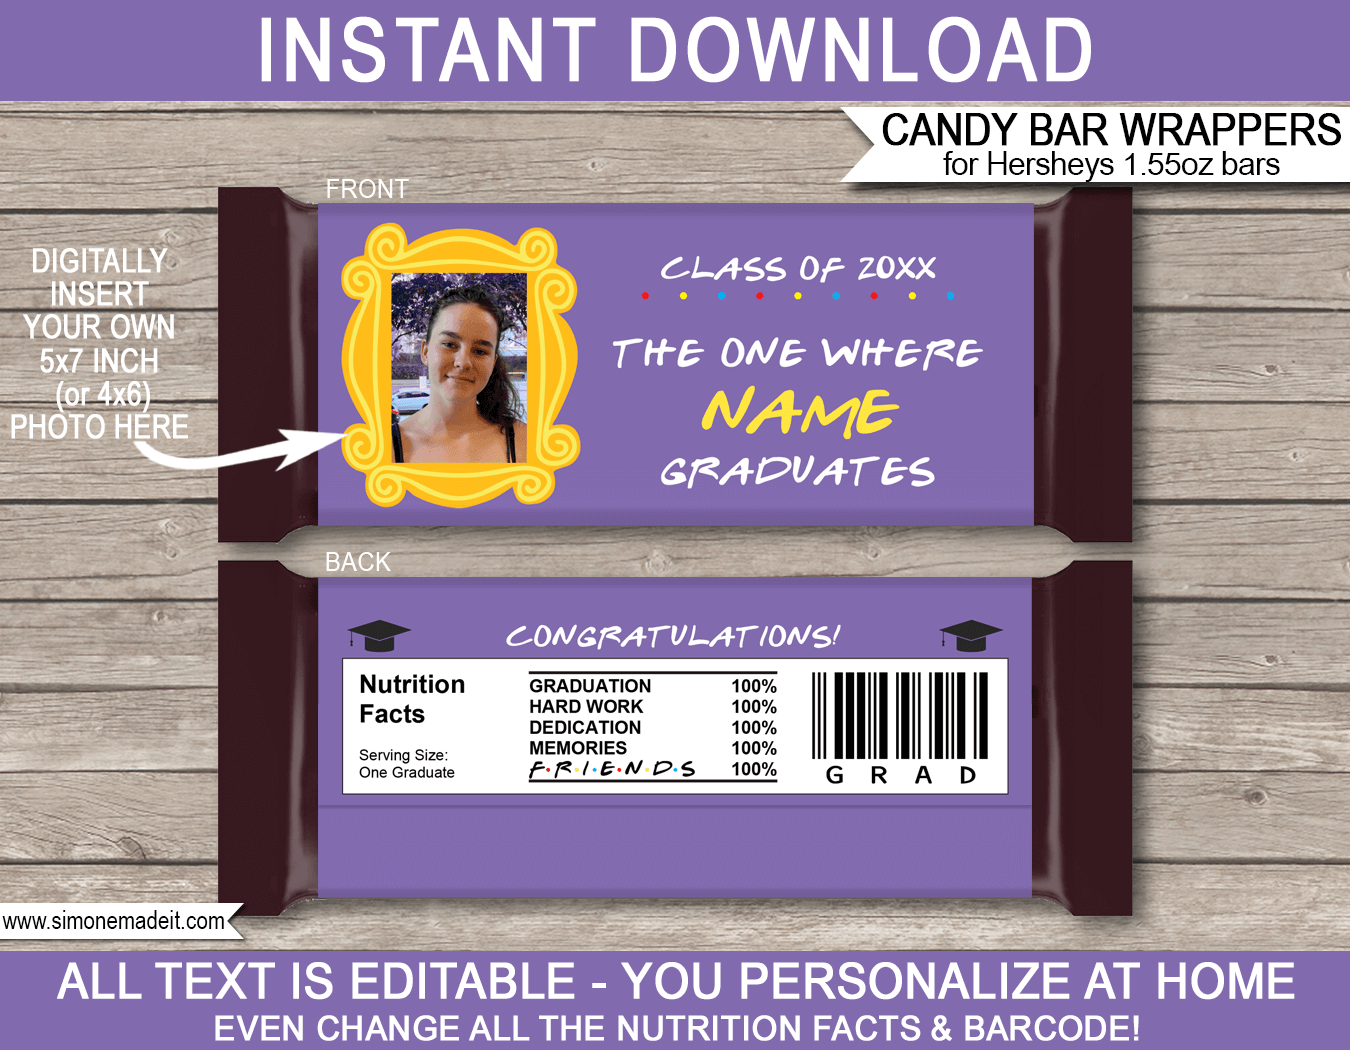 Friends TV Show Graduation Candy Bar Wrappers | The One Where ... Graduates | Printable Hershey Candy Bars Label | Chocolate Bars | Friends TV Series Episode | Personalized Candy Bars | Graduation Party Gift | Editable Template | INSTANT DOWNLOAD via simonemadeit.com | INSTANT DOWNLOAD via simonemadeit.com